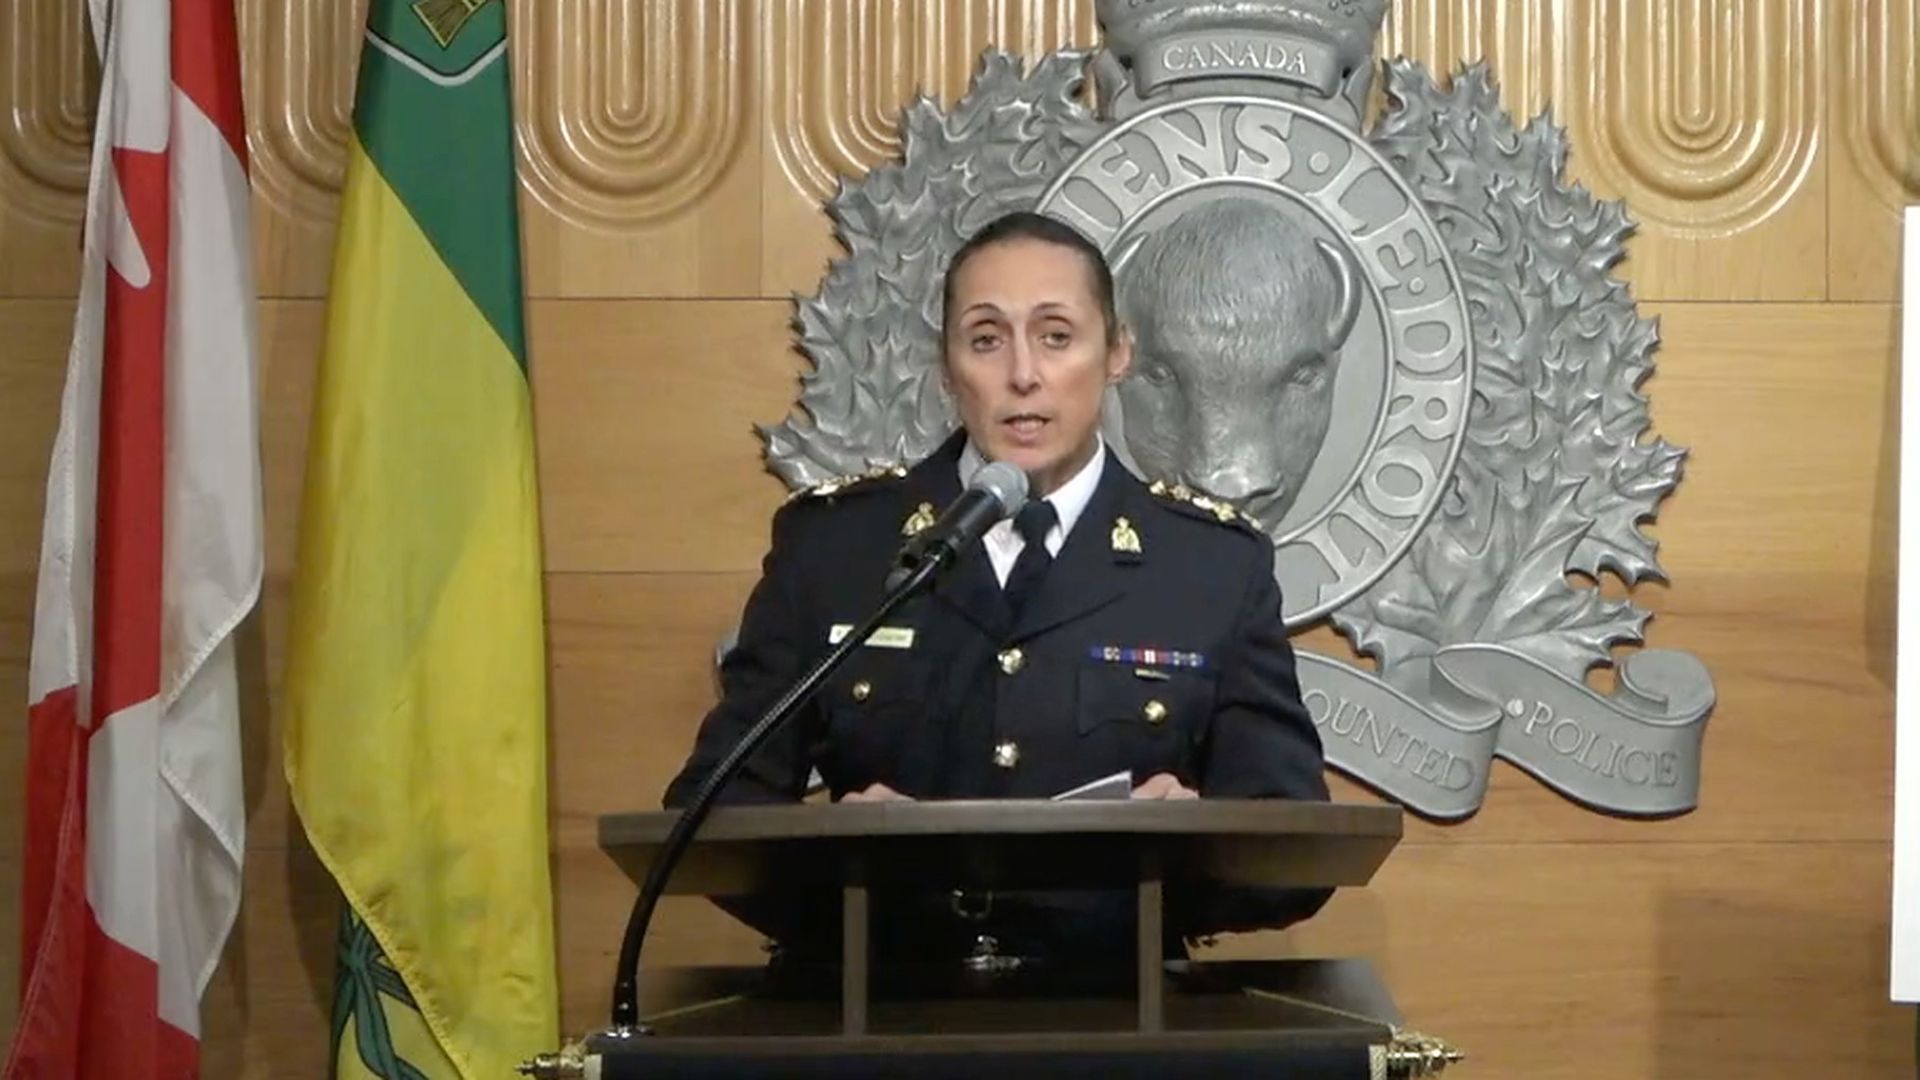 Rhonda Blackmore, the Assistant Commissioner of the RCMP Saskatchewan, speaking at a news conference.